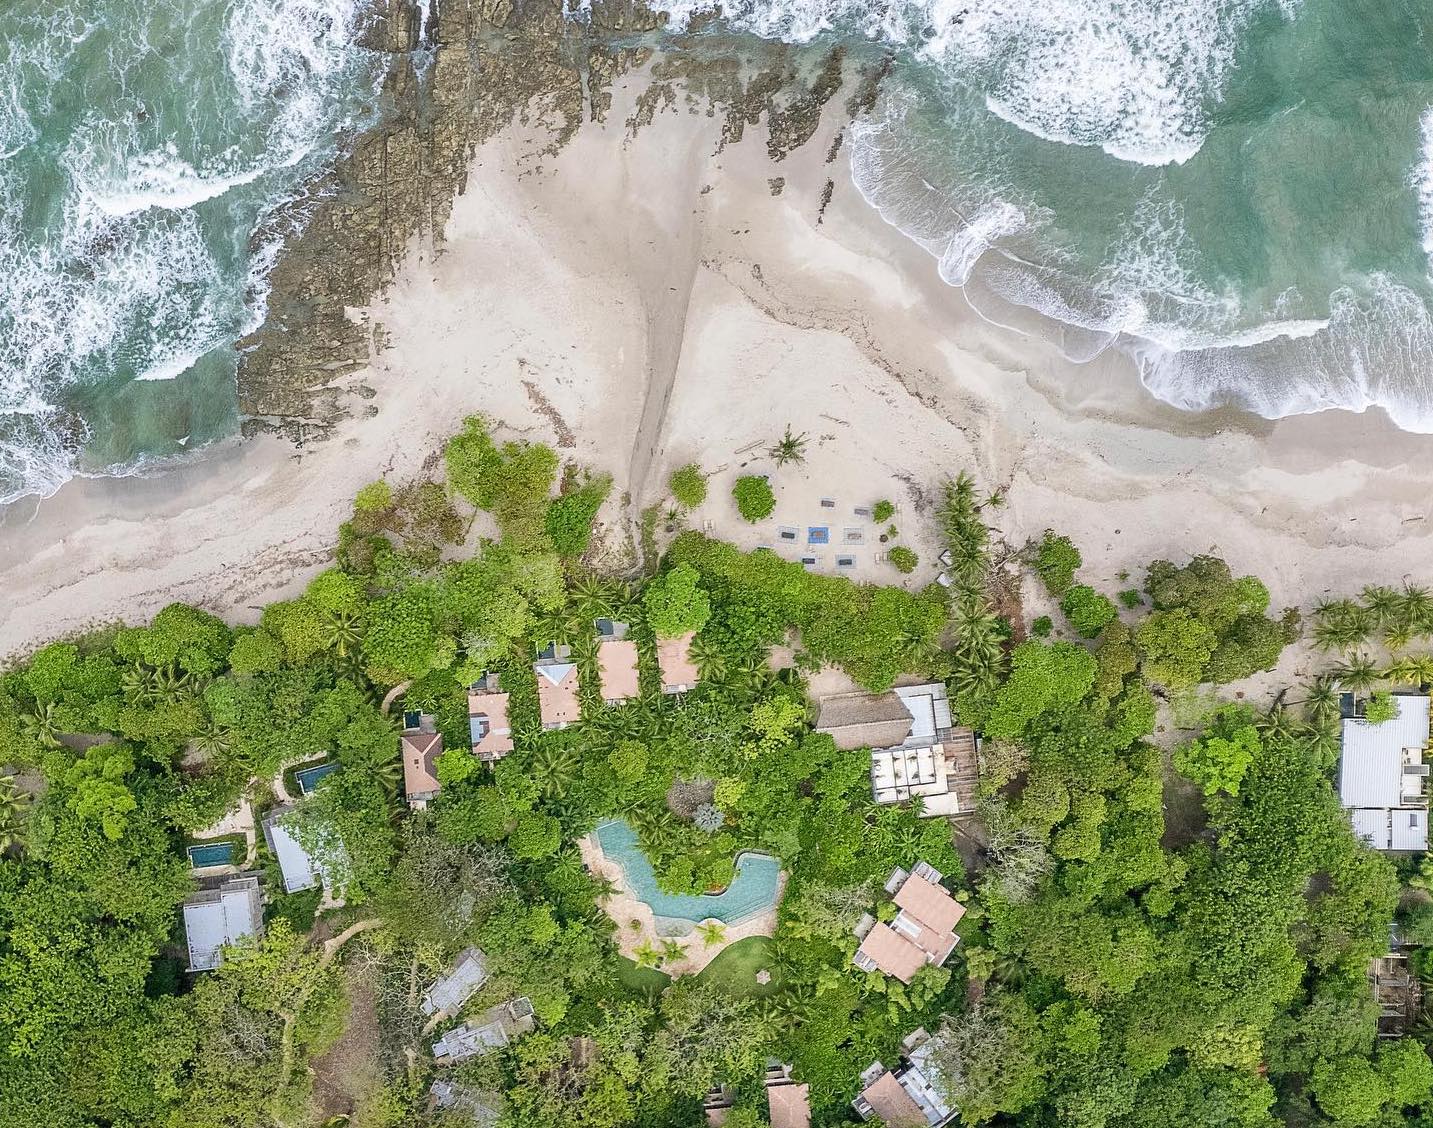 If you're headed to Costa Rica in search of eco-conscious wellness, Camila Aguilar, lead concierge at Nantipa has a few suggestions.